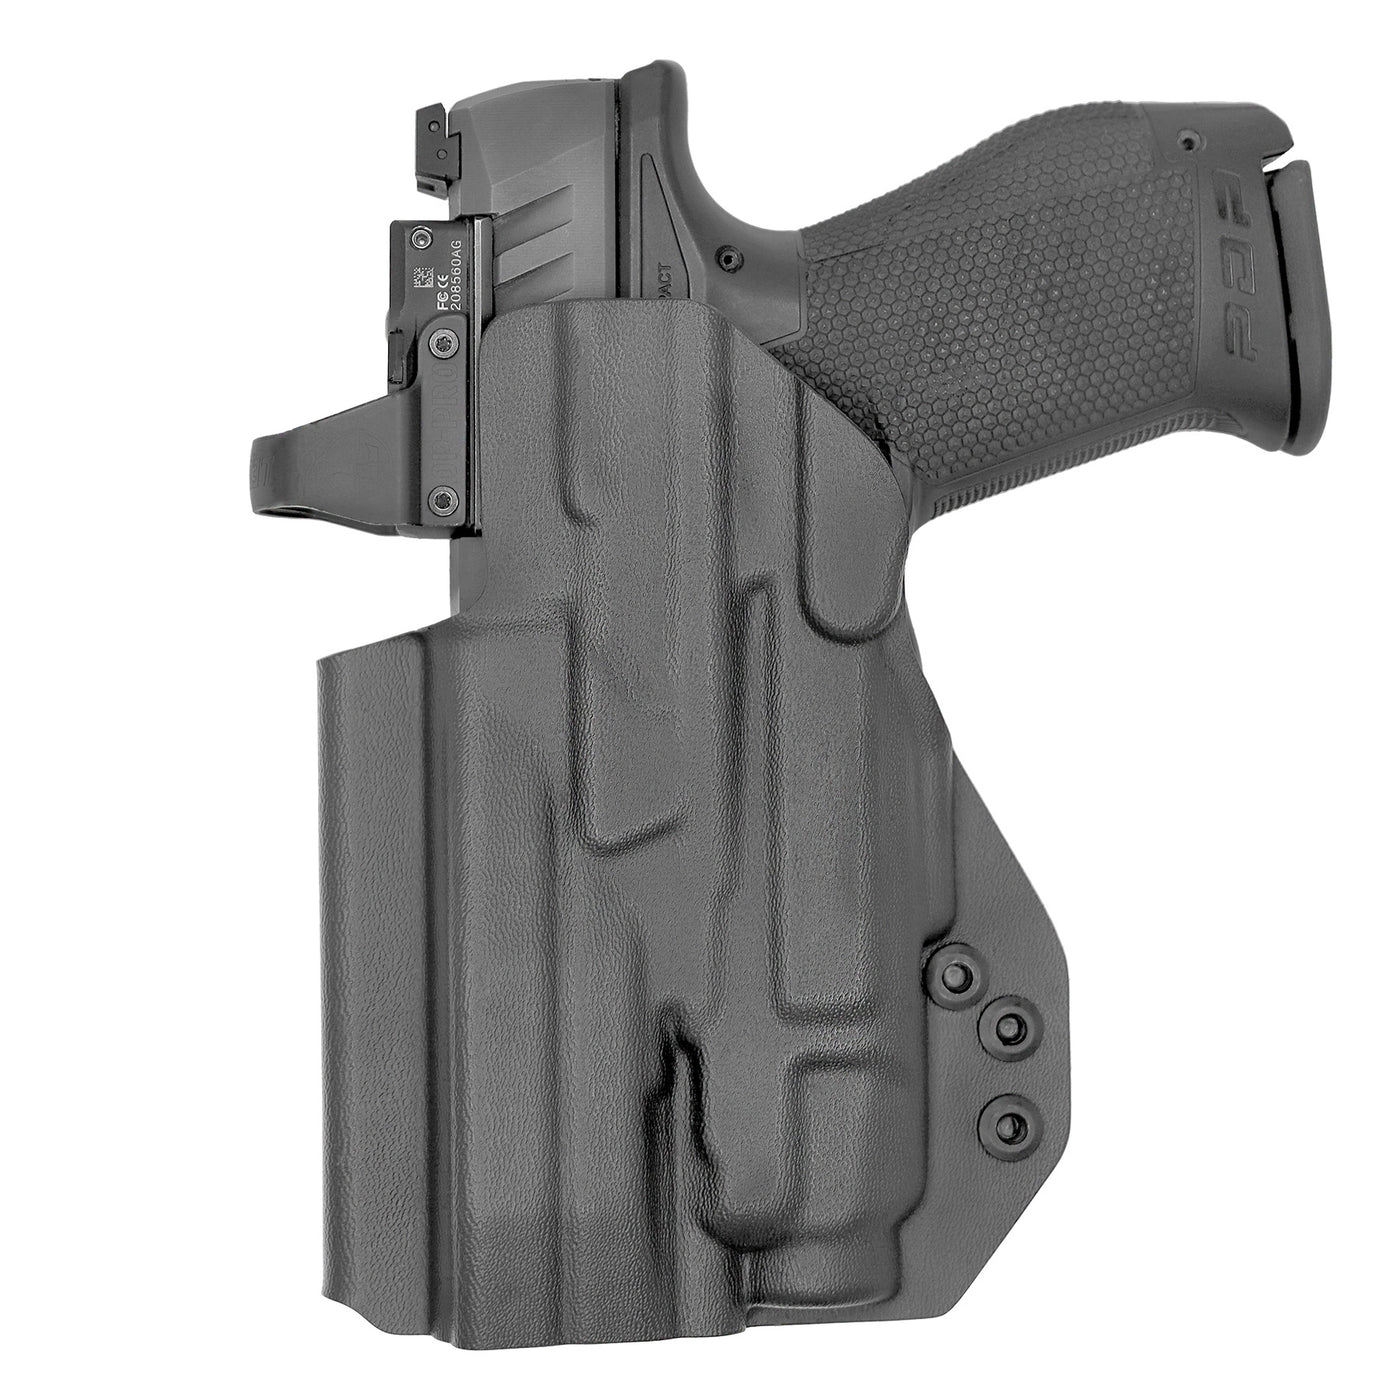 C&G Holsters custom IWB Tactical FN 509/t Streamlight TLR7/a in holstered position back view